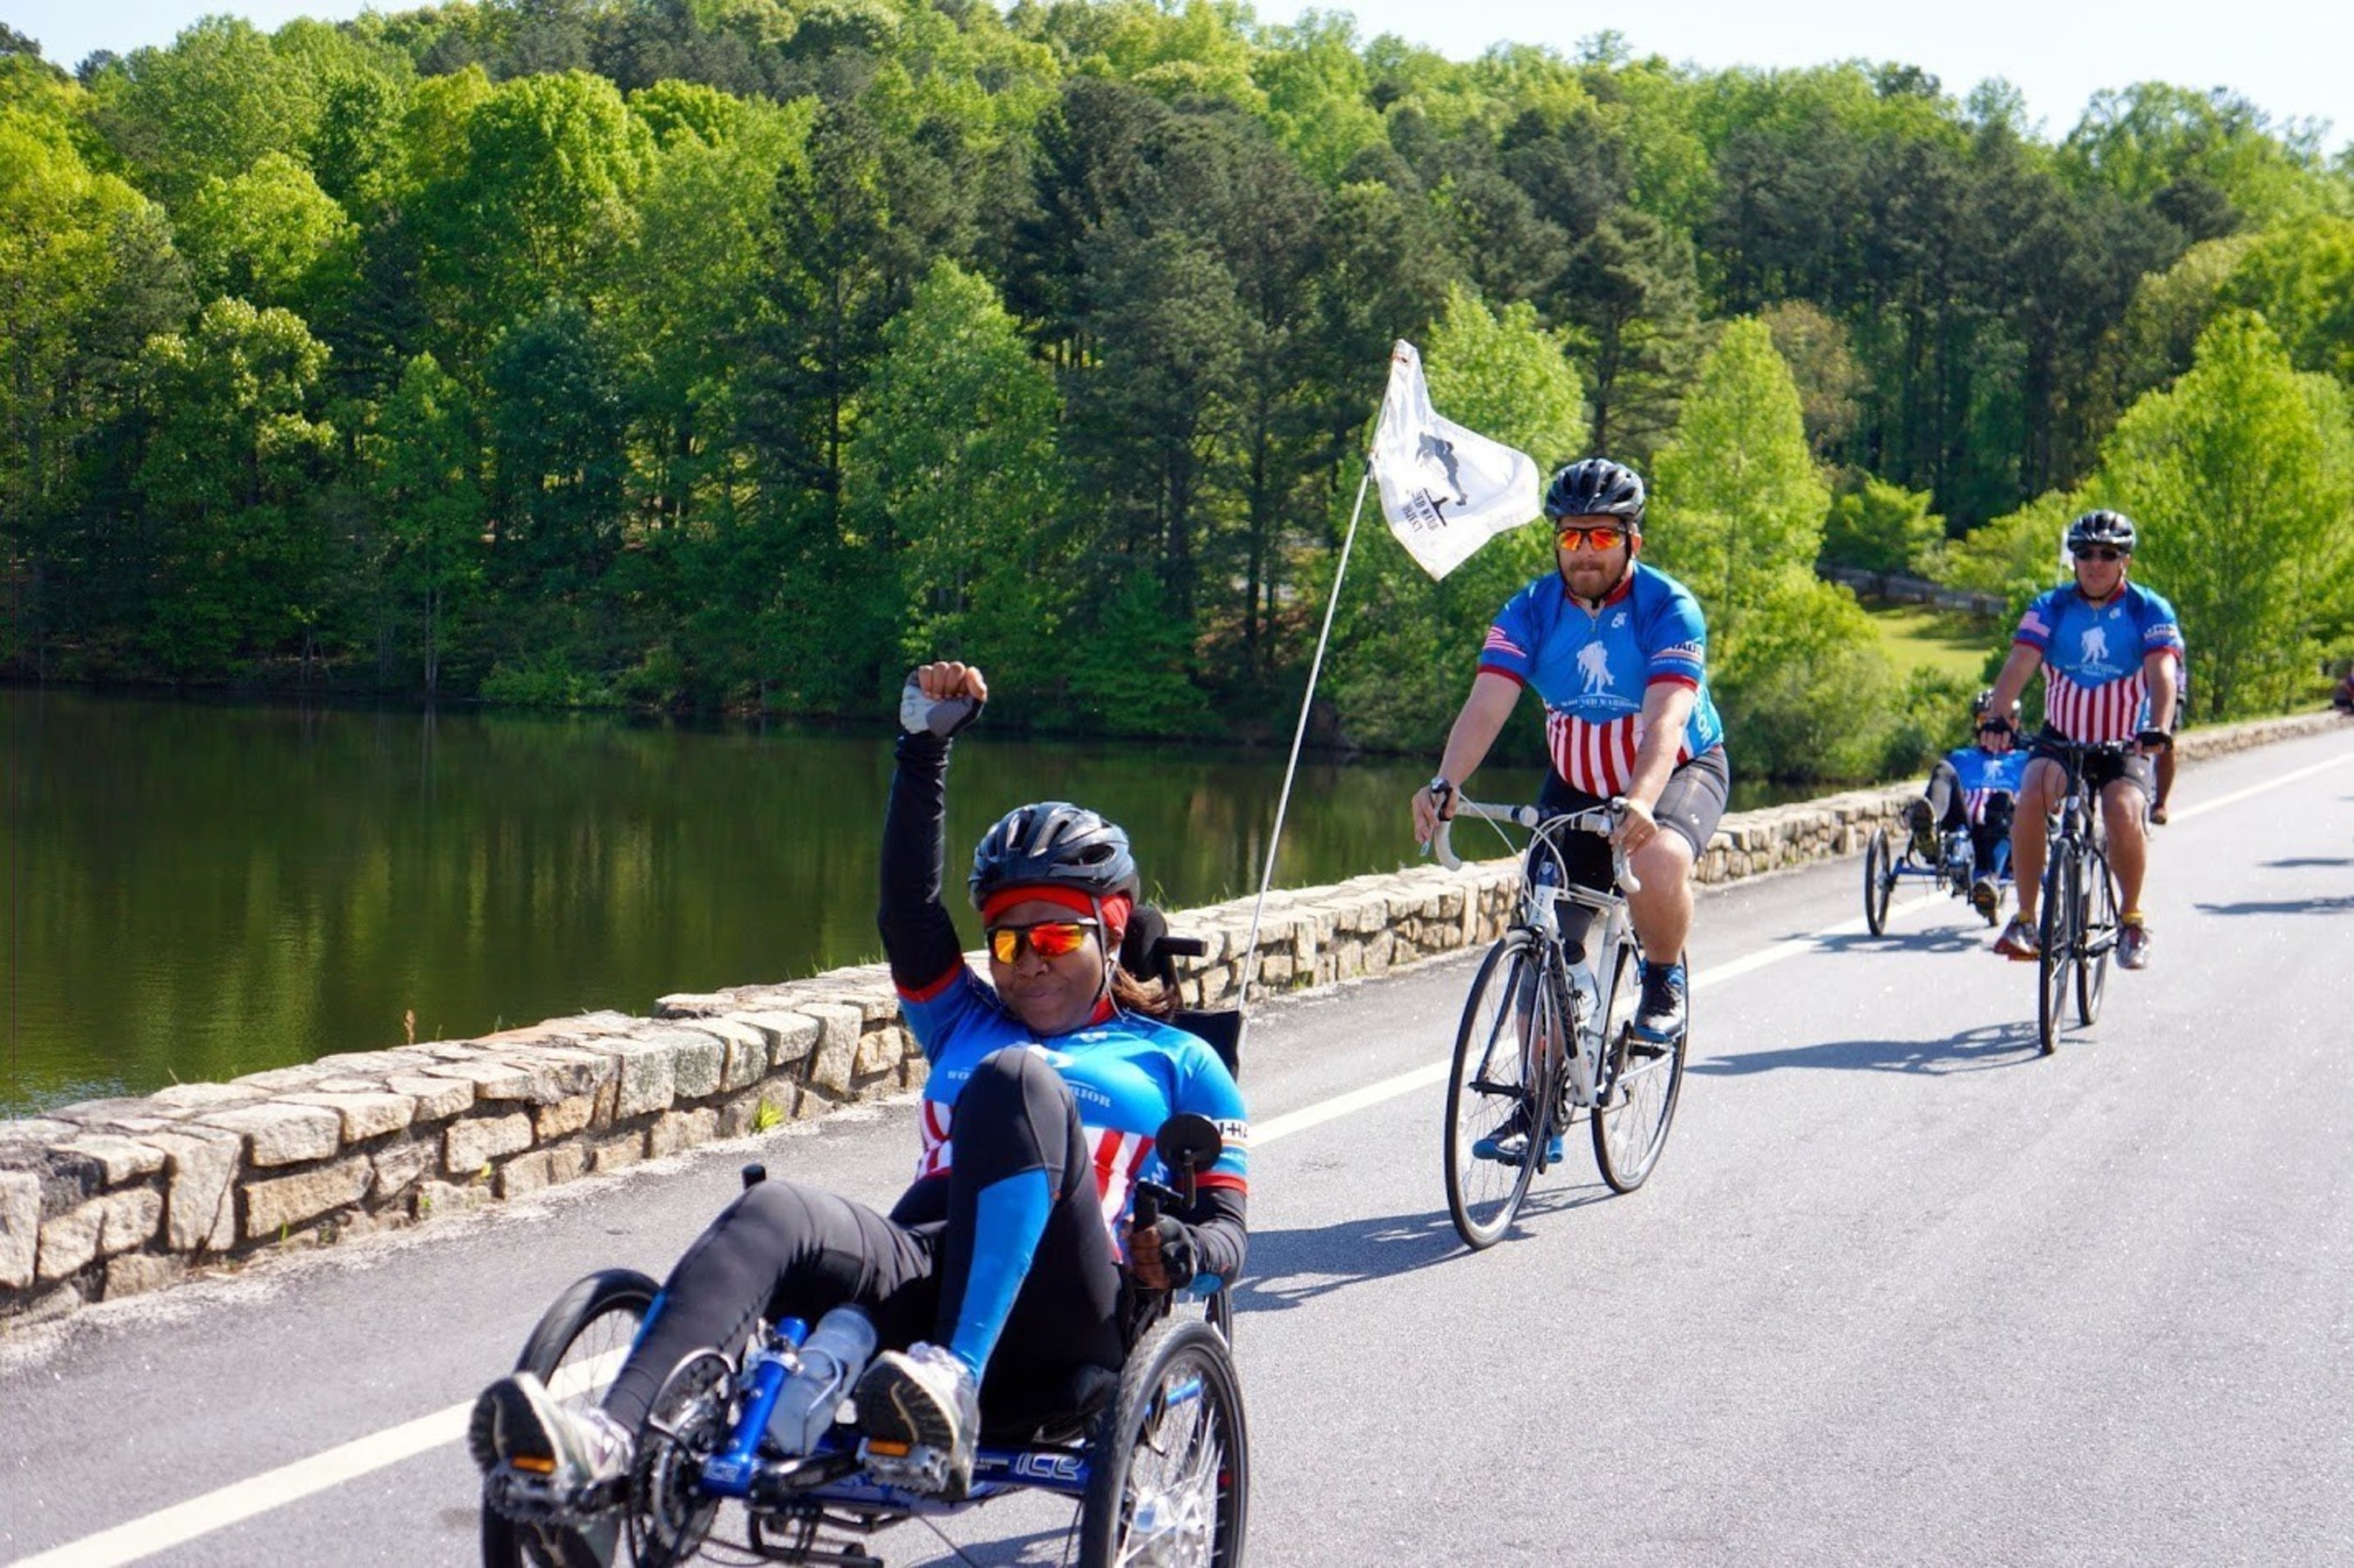 Wounded veterans participating in the 2015 Wounded Warrior Project Soldier Ride in Atlanta.